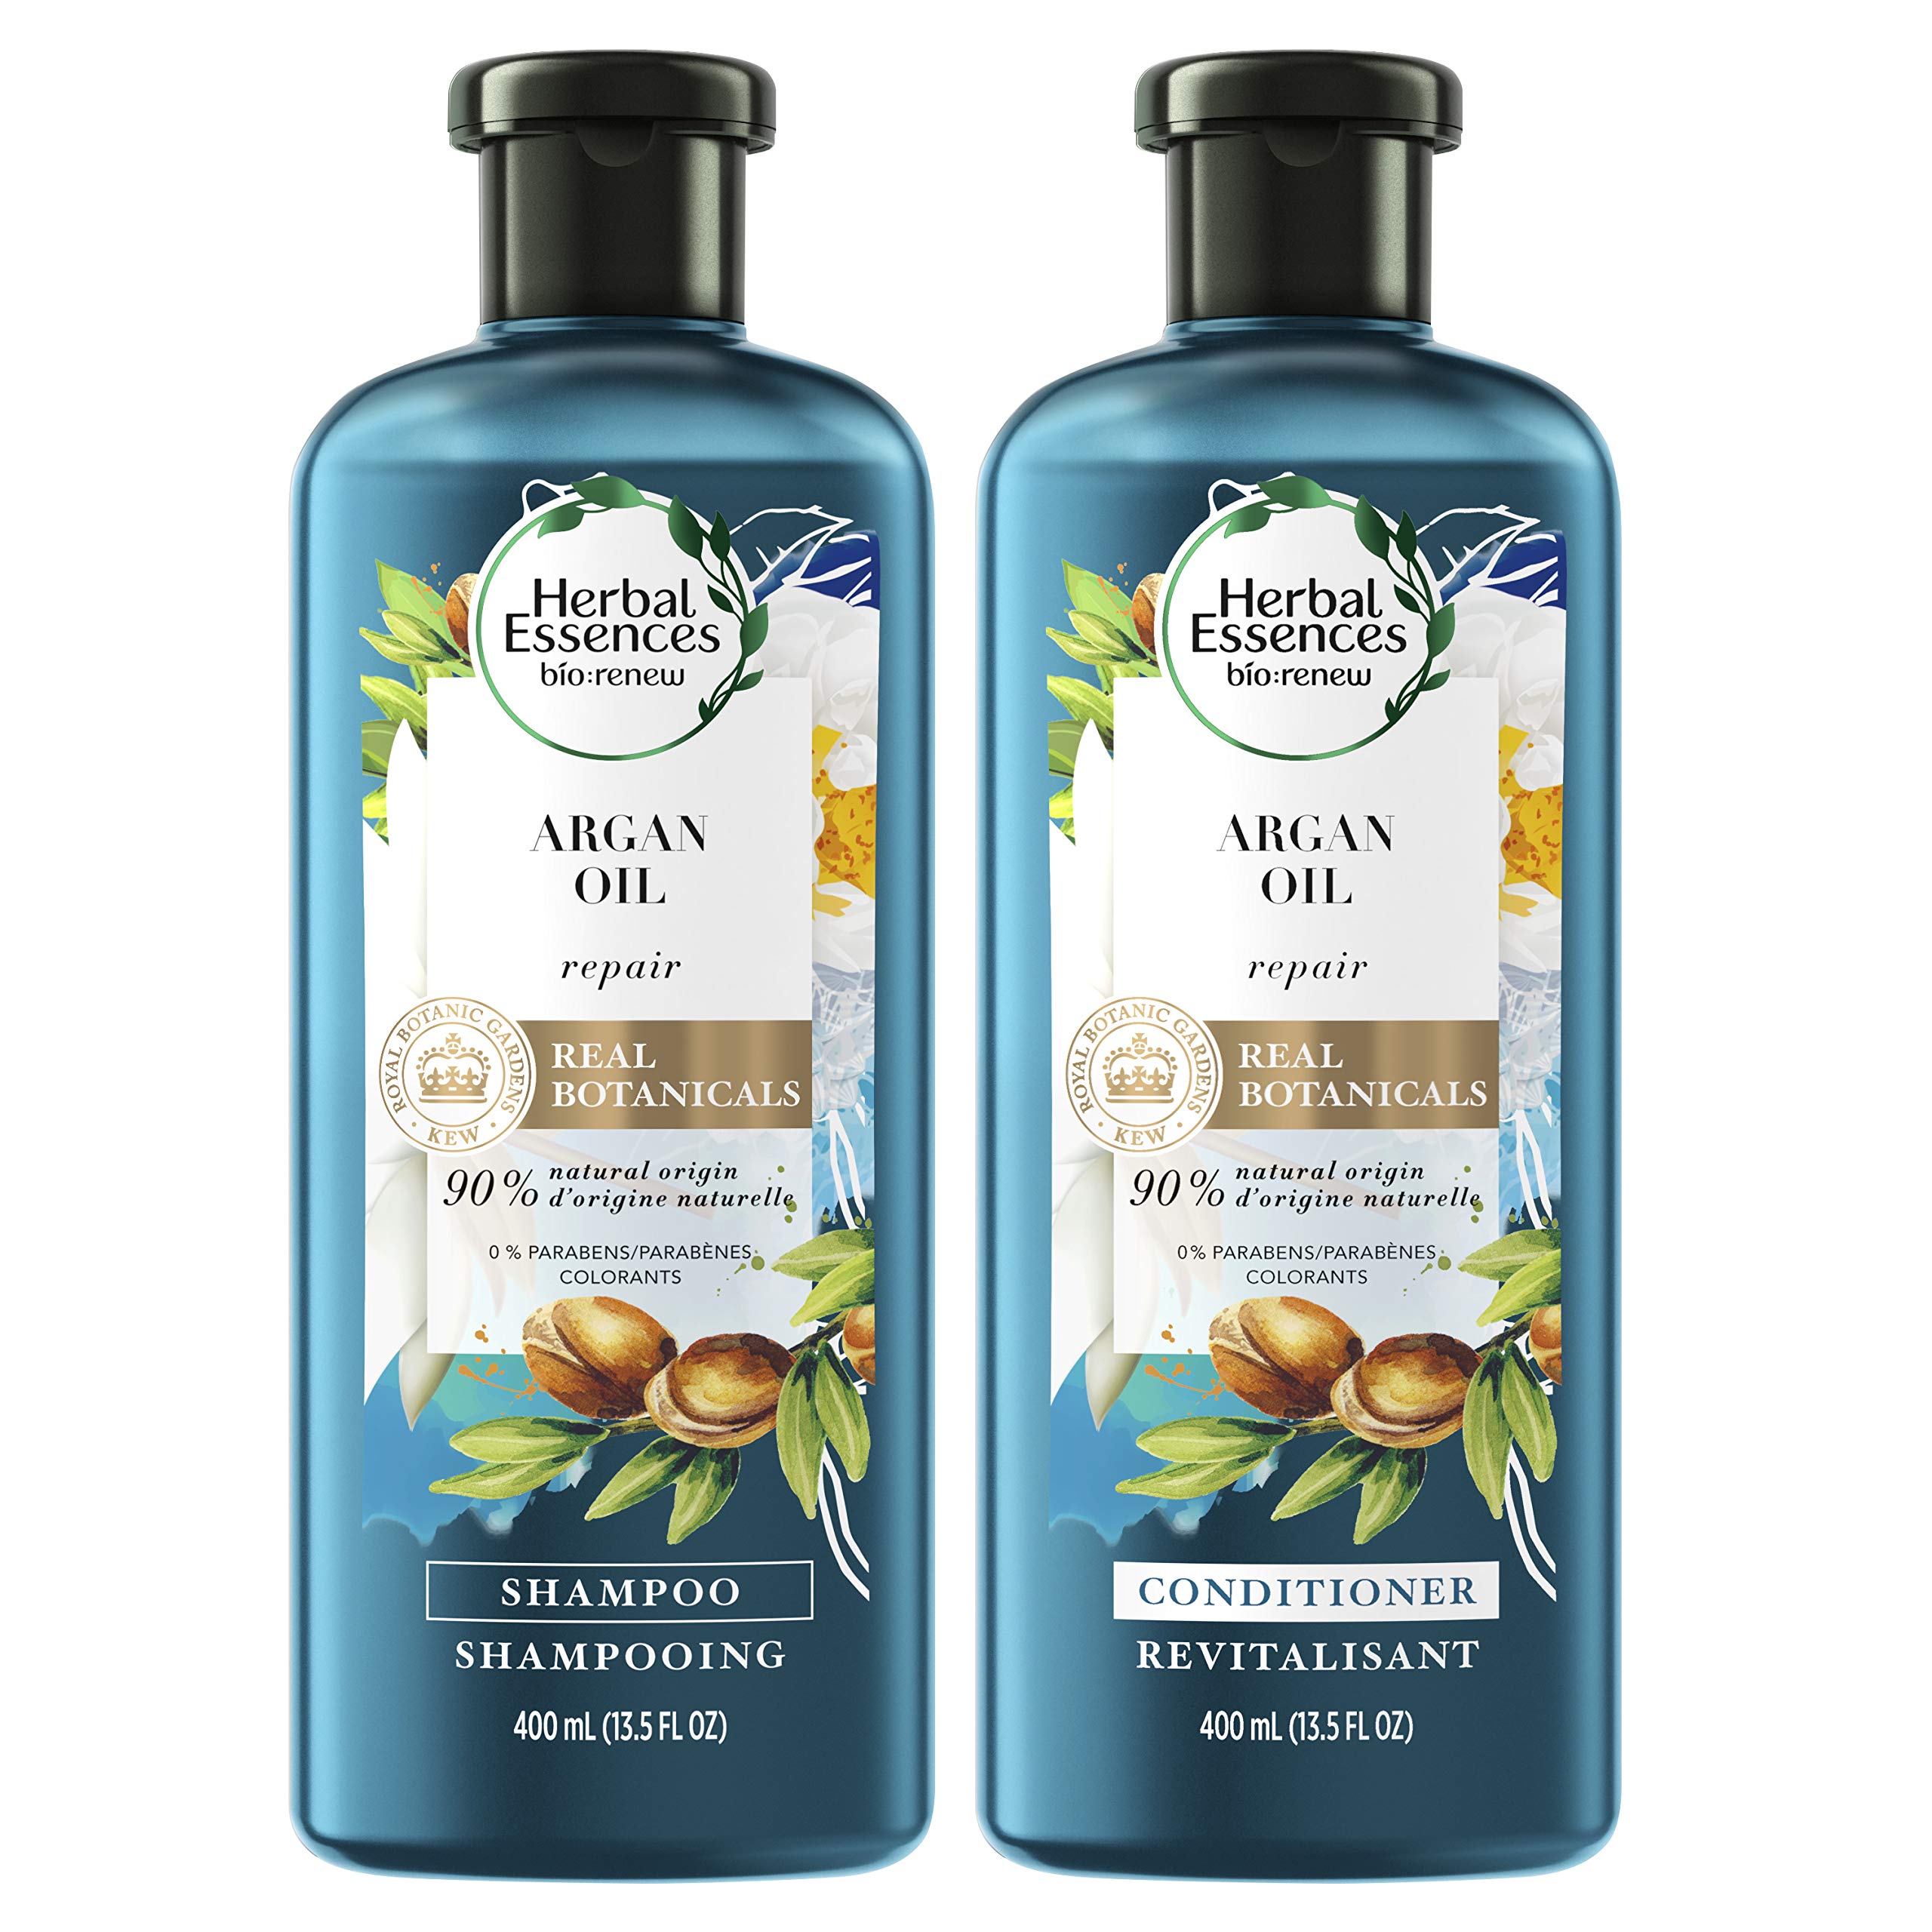 Herbal Essences Argan Oil of Morocco Shampoo and Conditioner for Color Treated Hair, , Paraben Free, BioRenew, Bundle Pack, 13.5 FL OZ